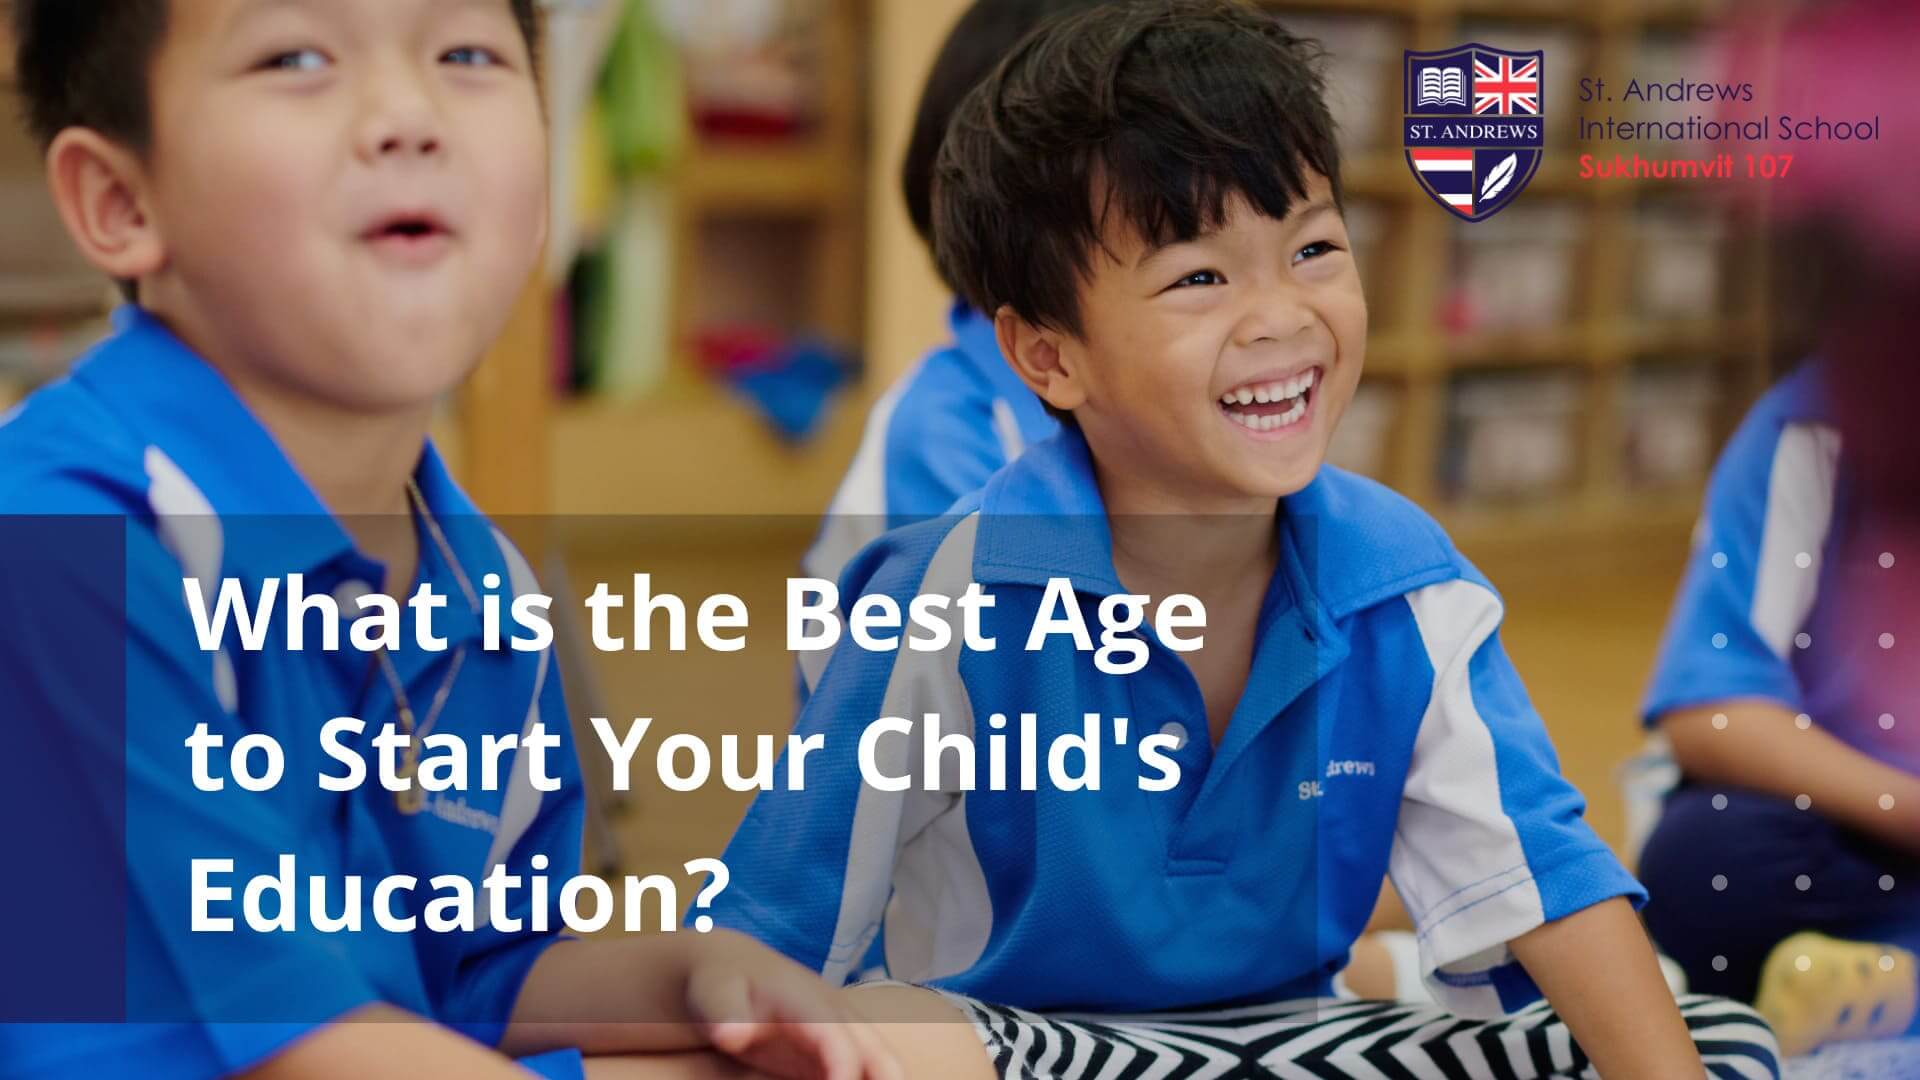 What is the Best Age to Start Your Child's Education